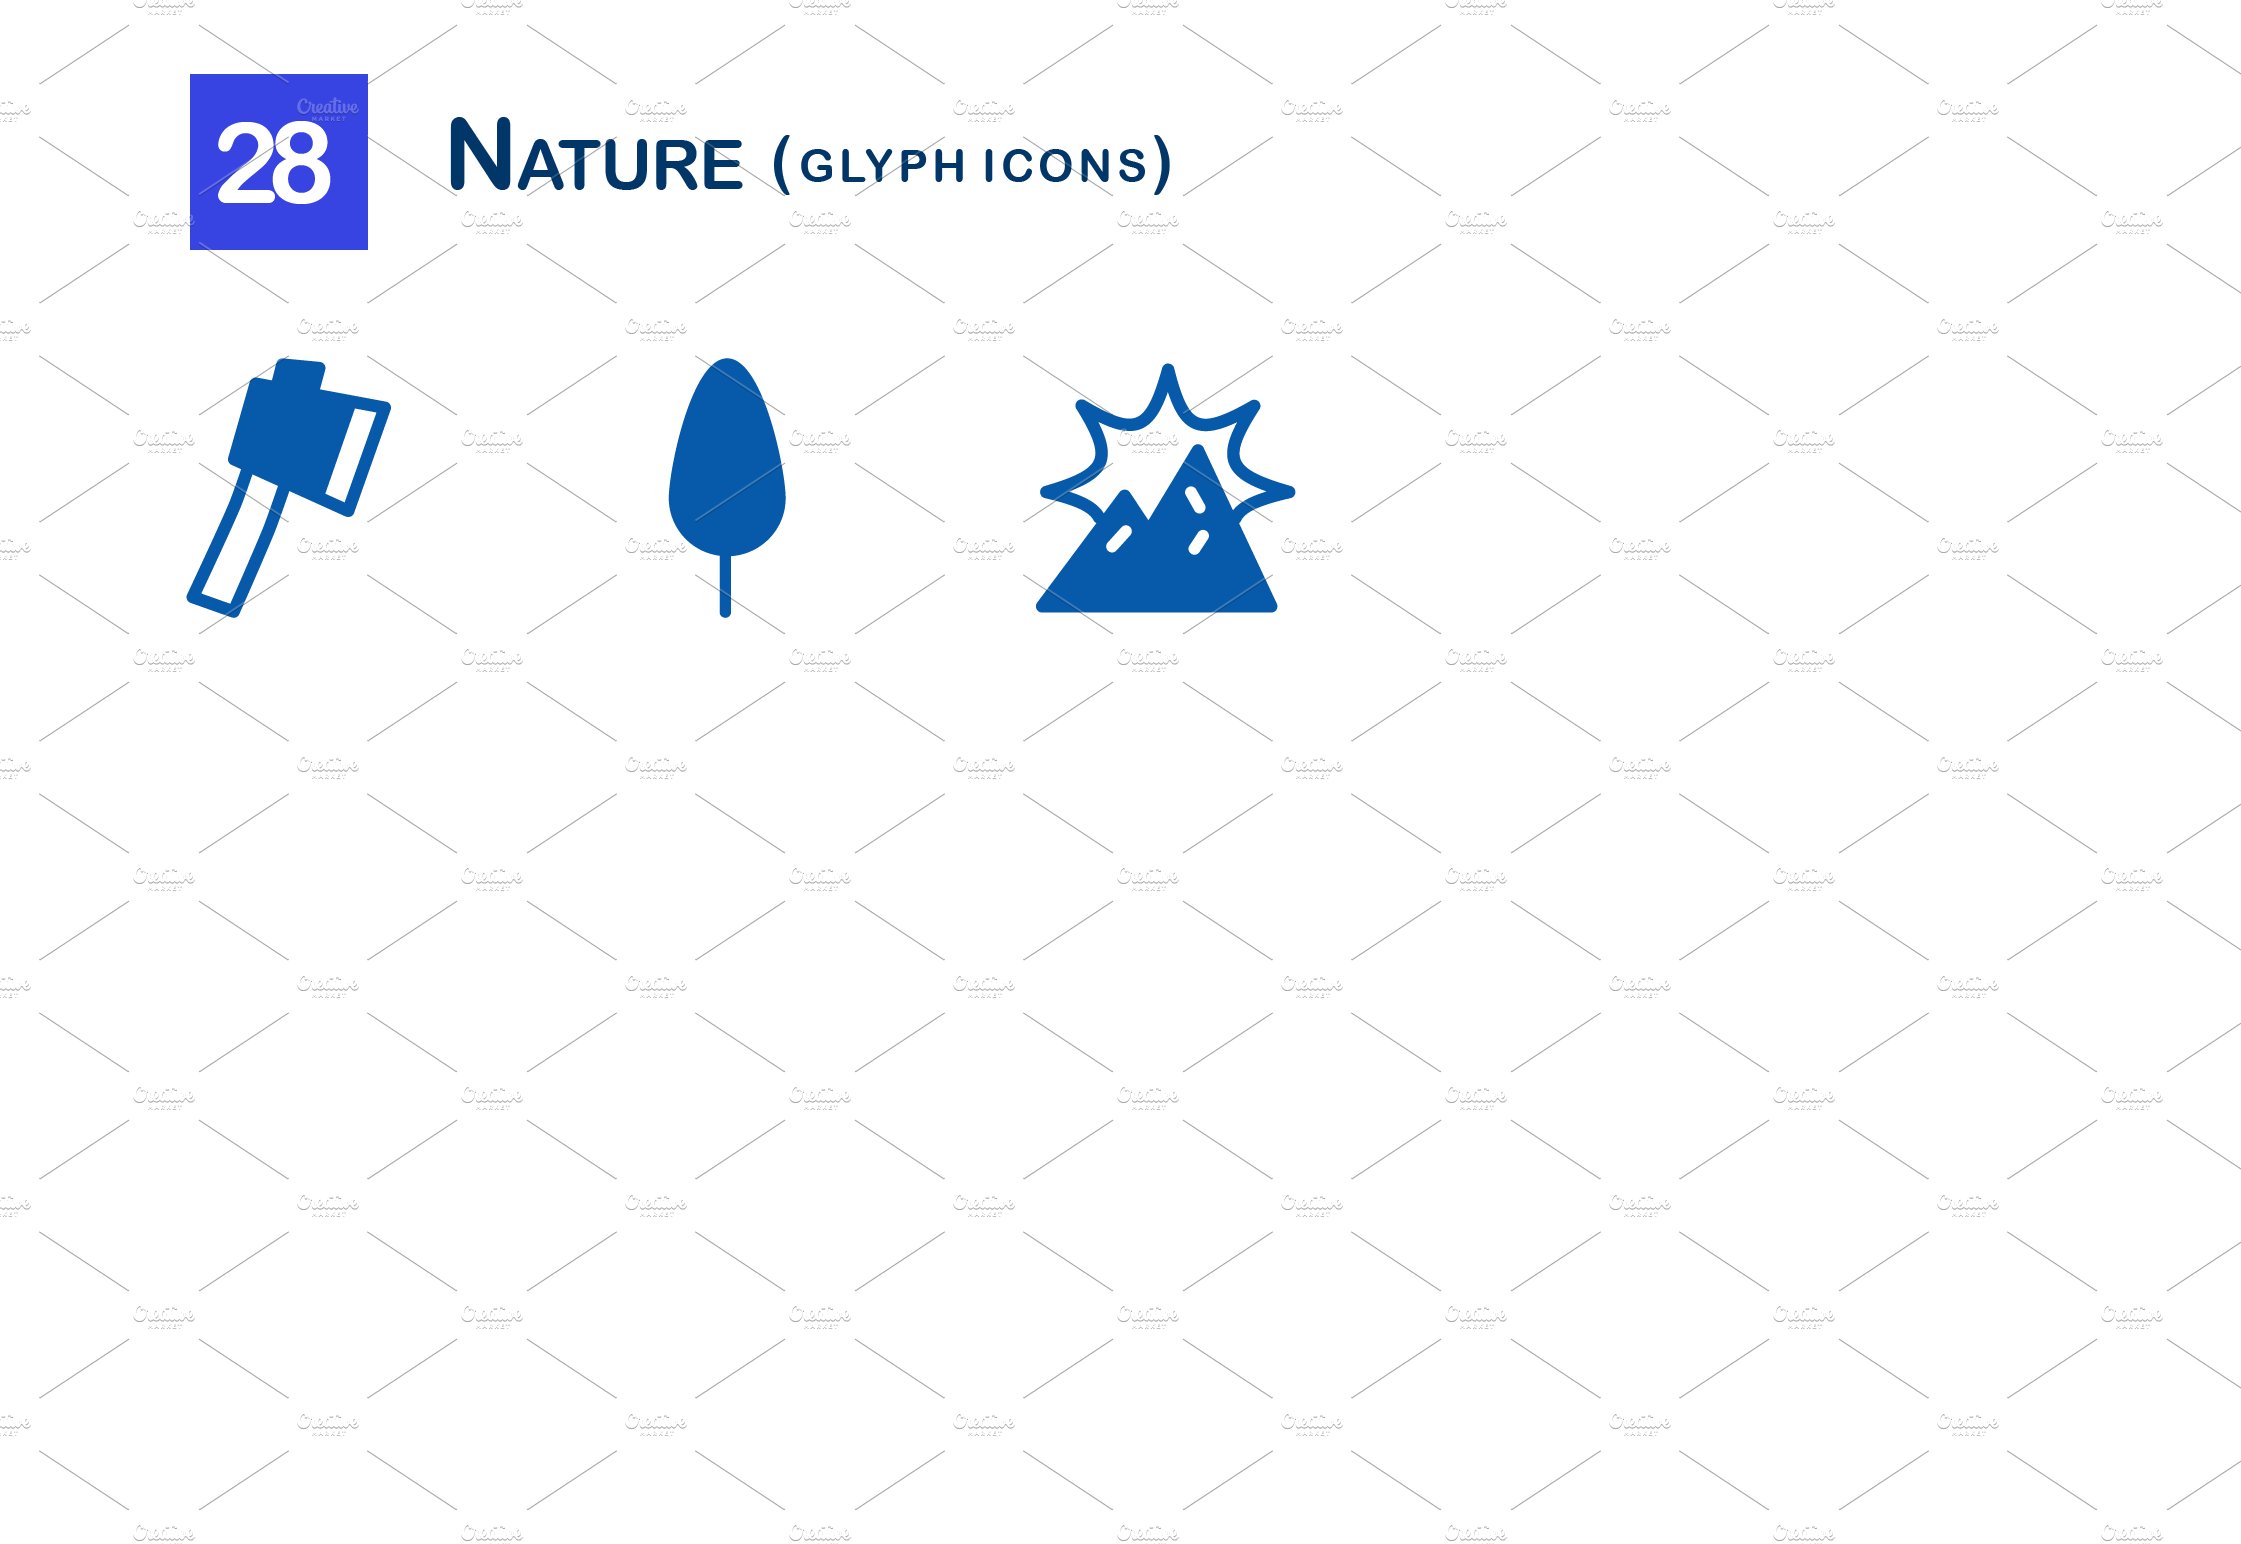 nature glyph icons preview slide 2 93